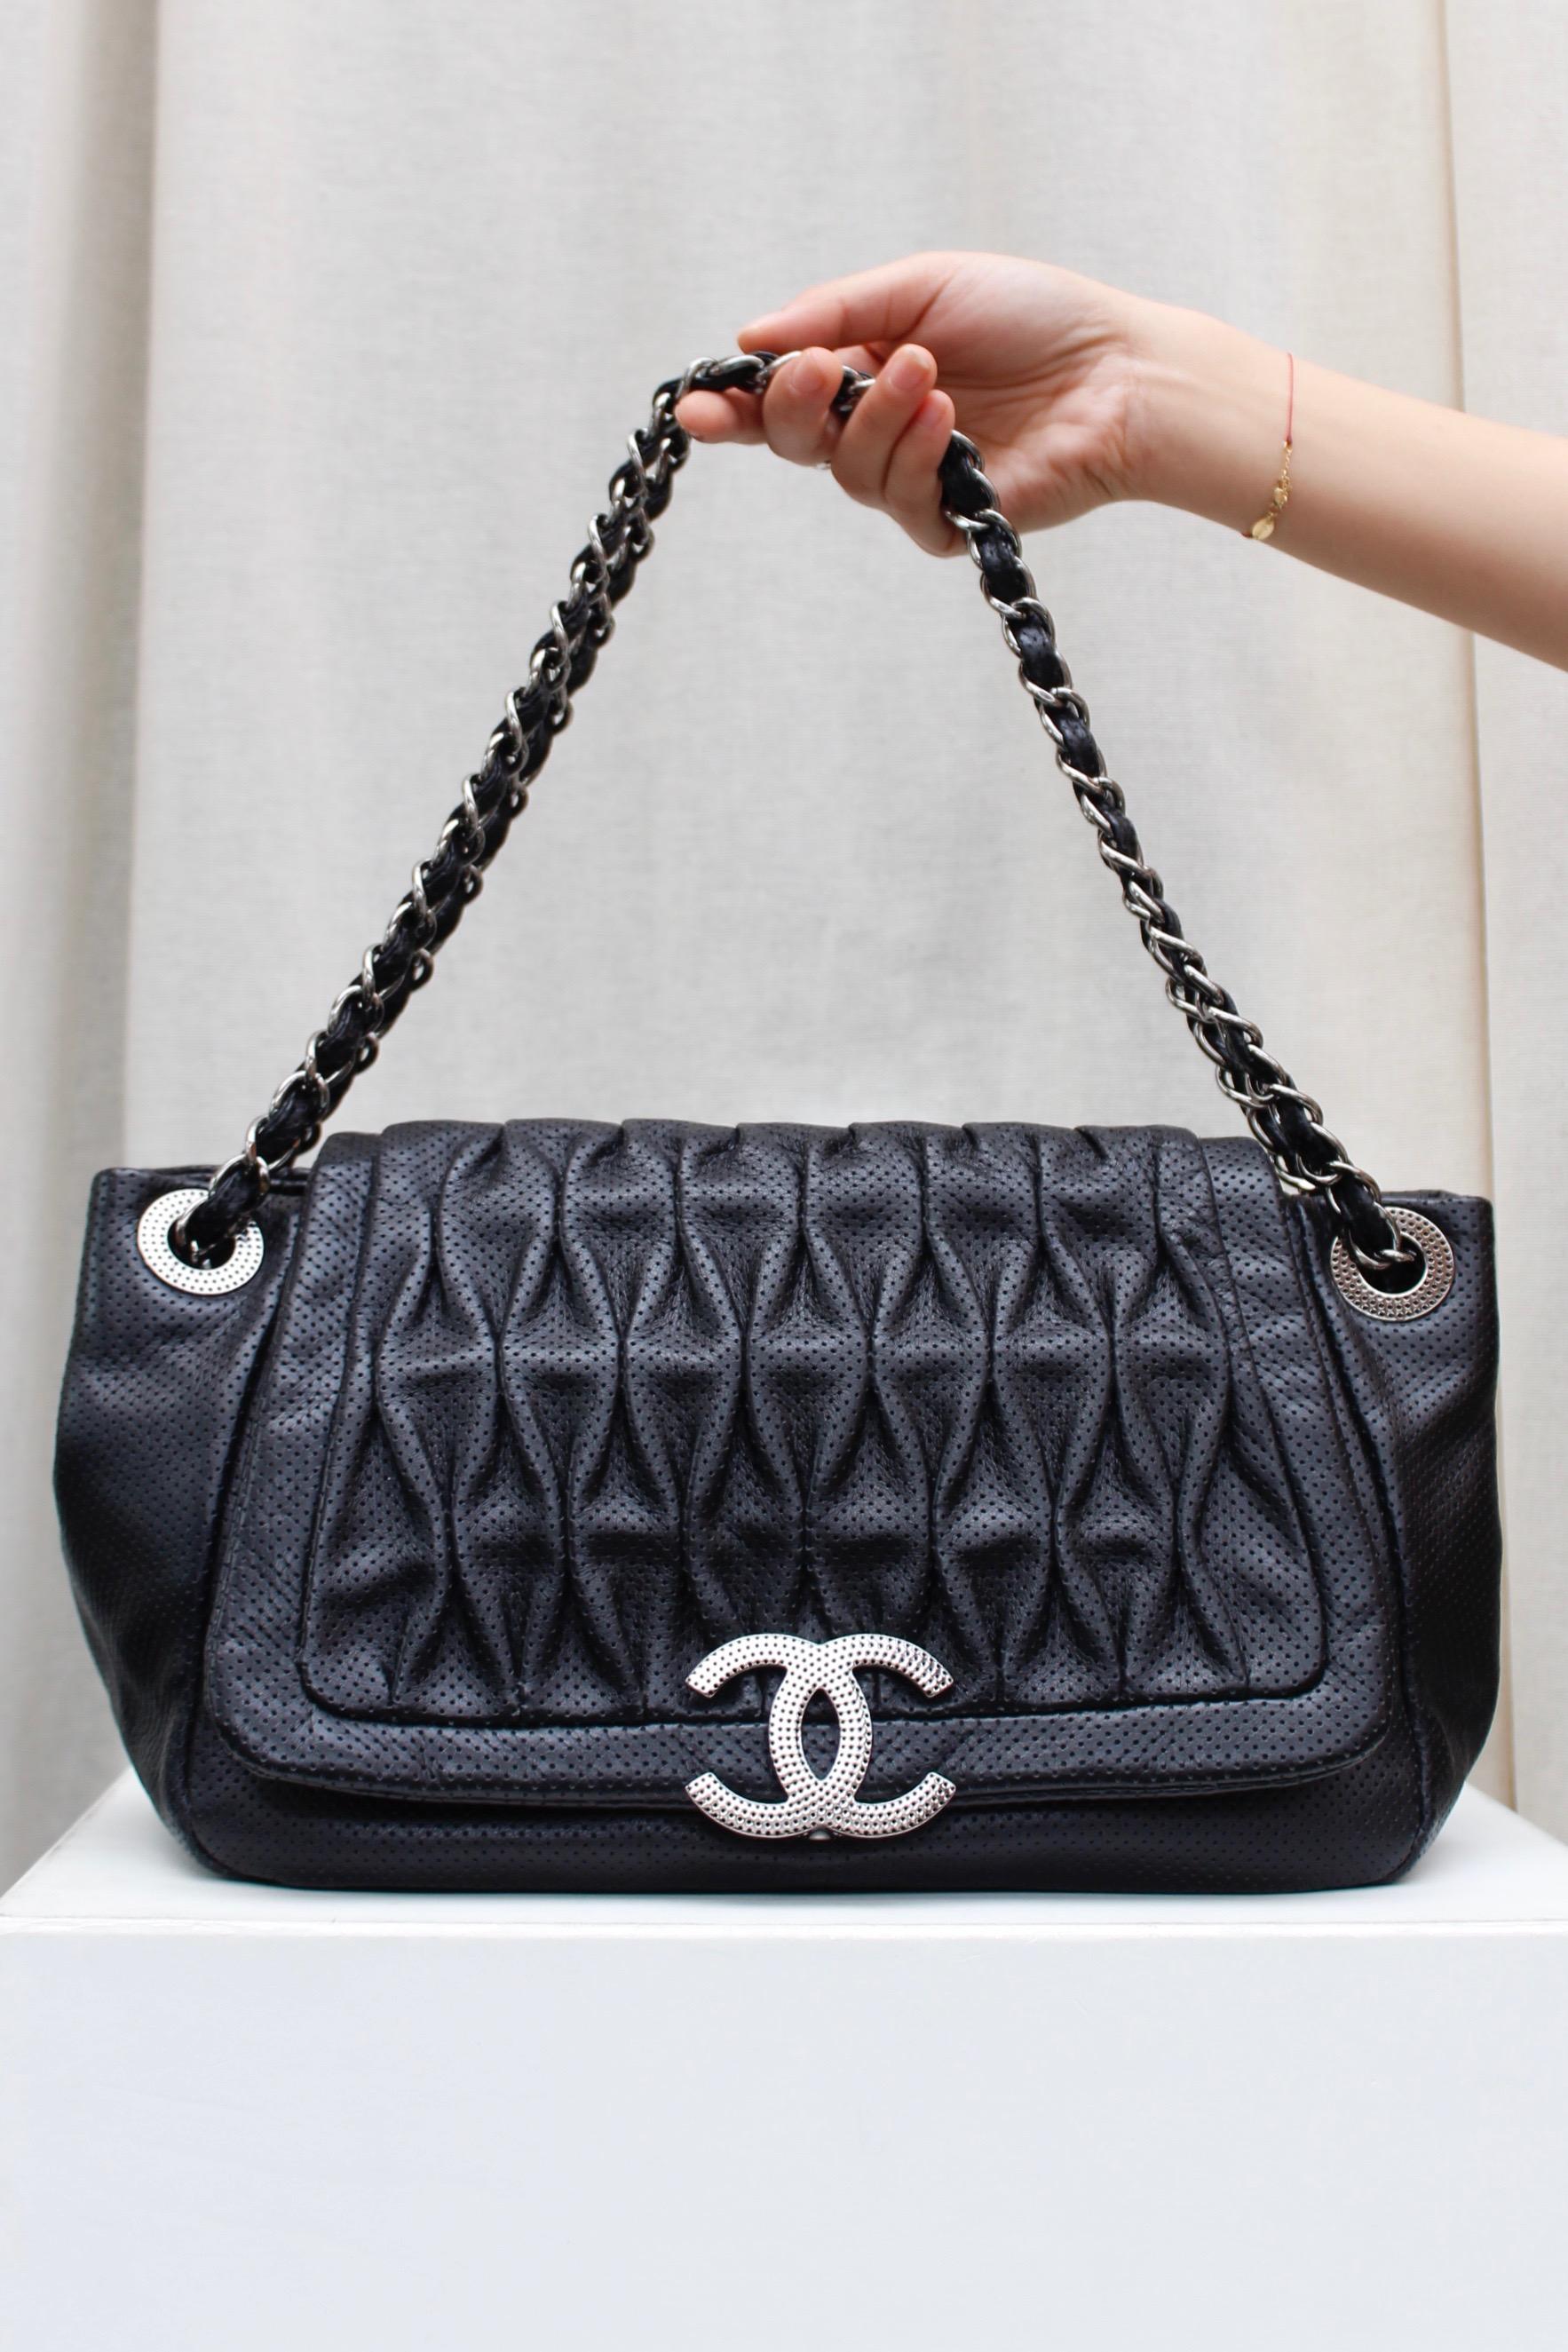 CHANEL (Made in Italy) Superb bag composed of perforated pleated black veal skin. It can be carried over the shoulder or cross-body by means of two sliding handles composed of silver plated chain entwined with black leather. The bag offers a